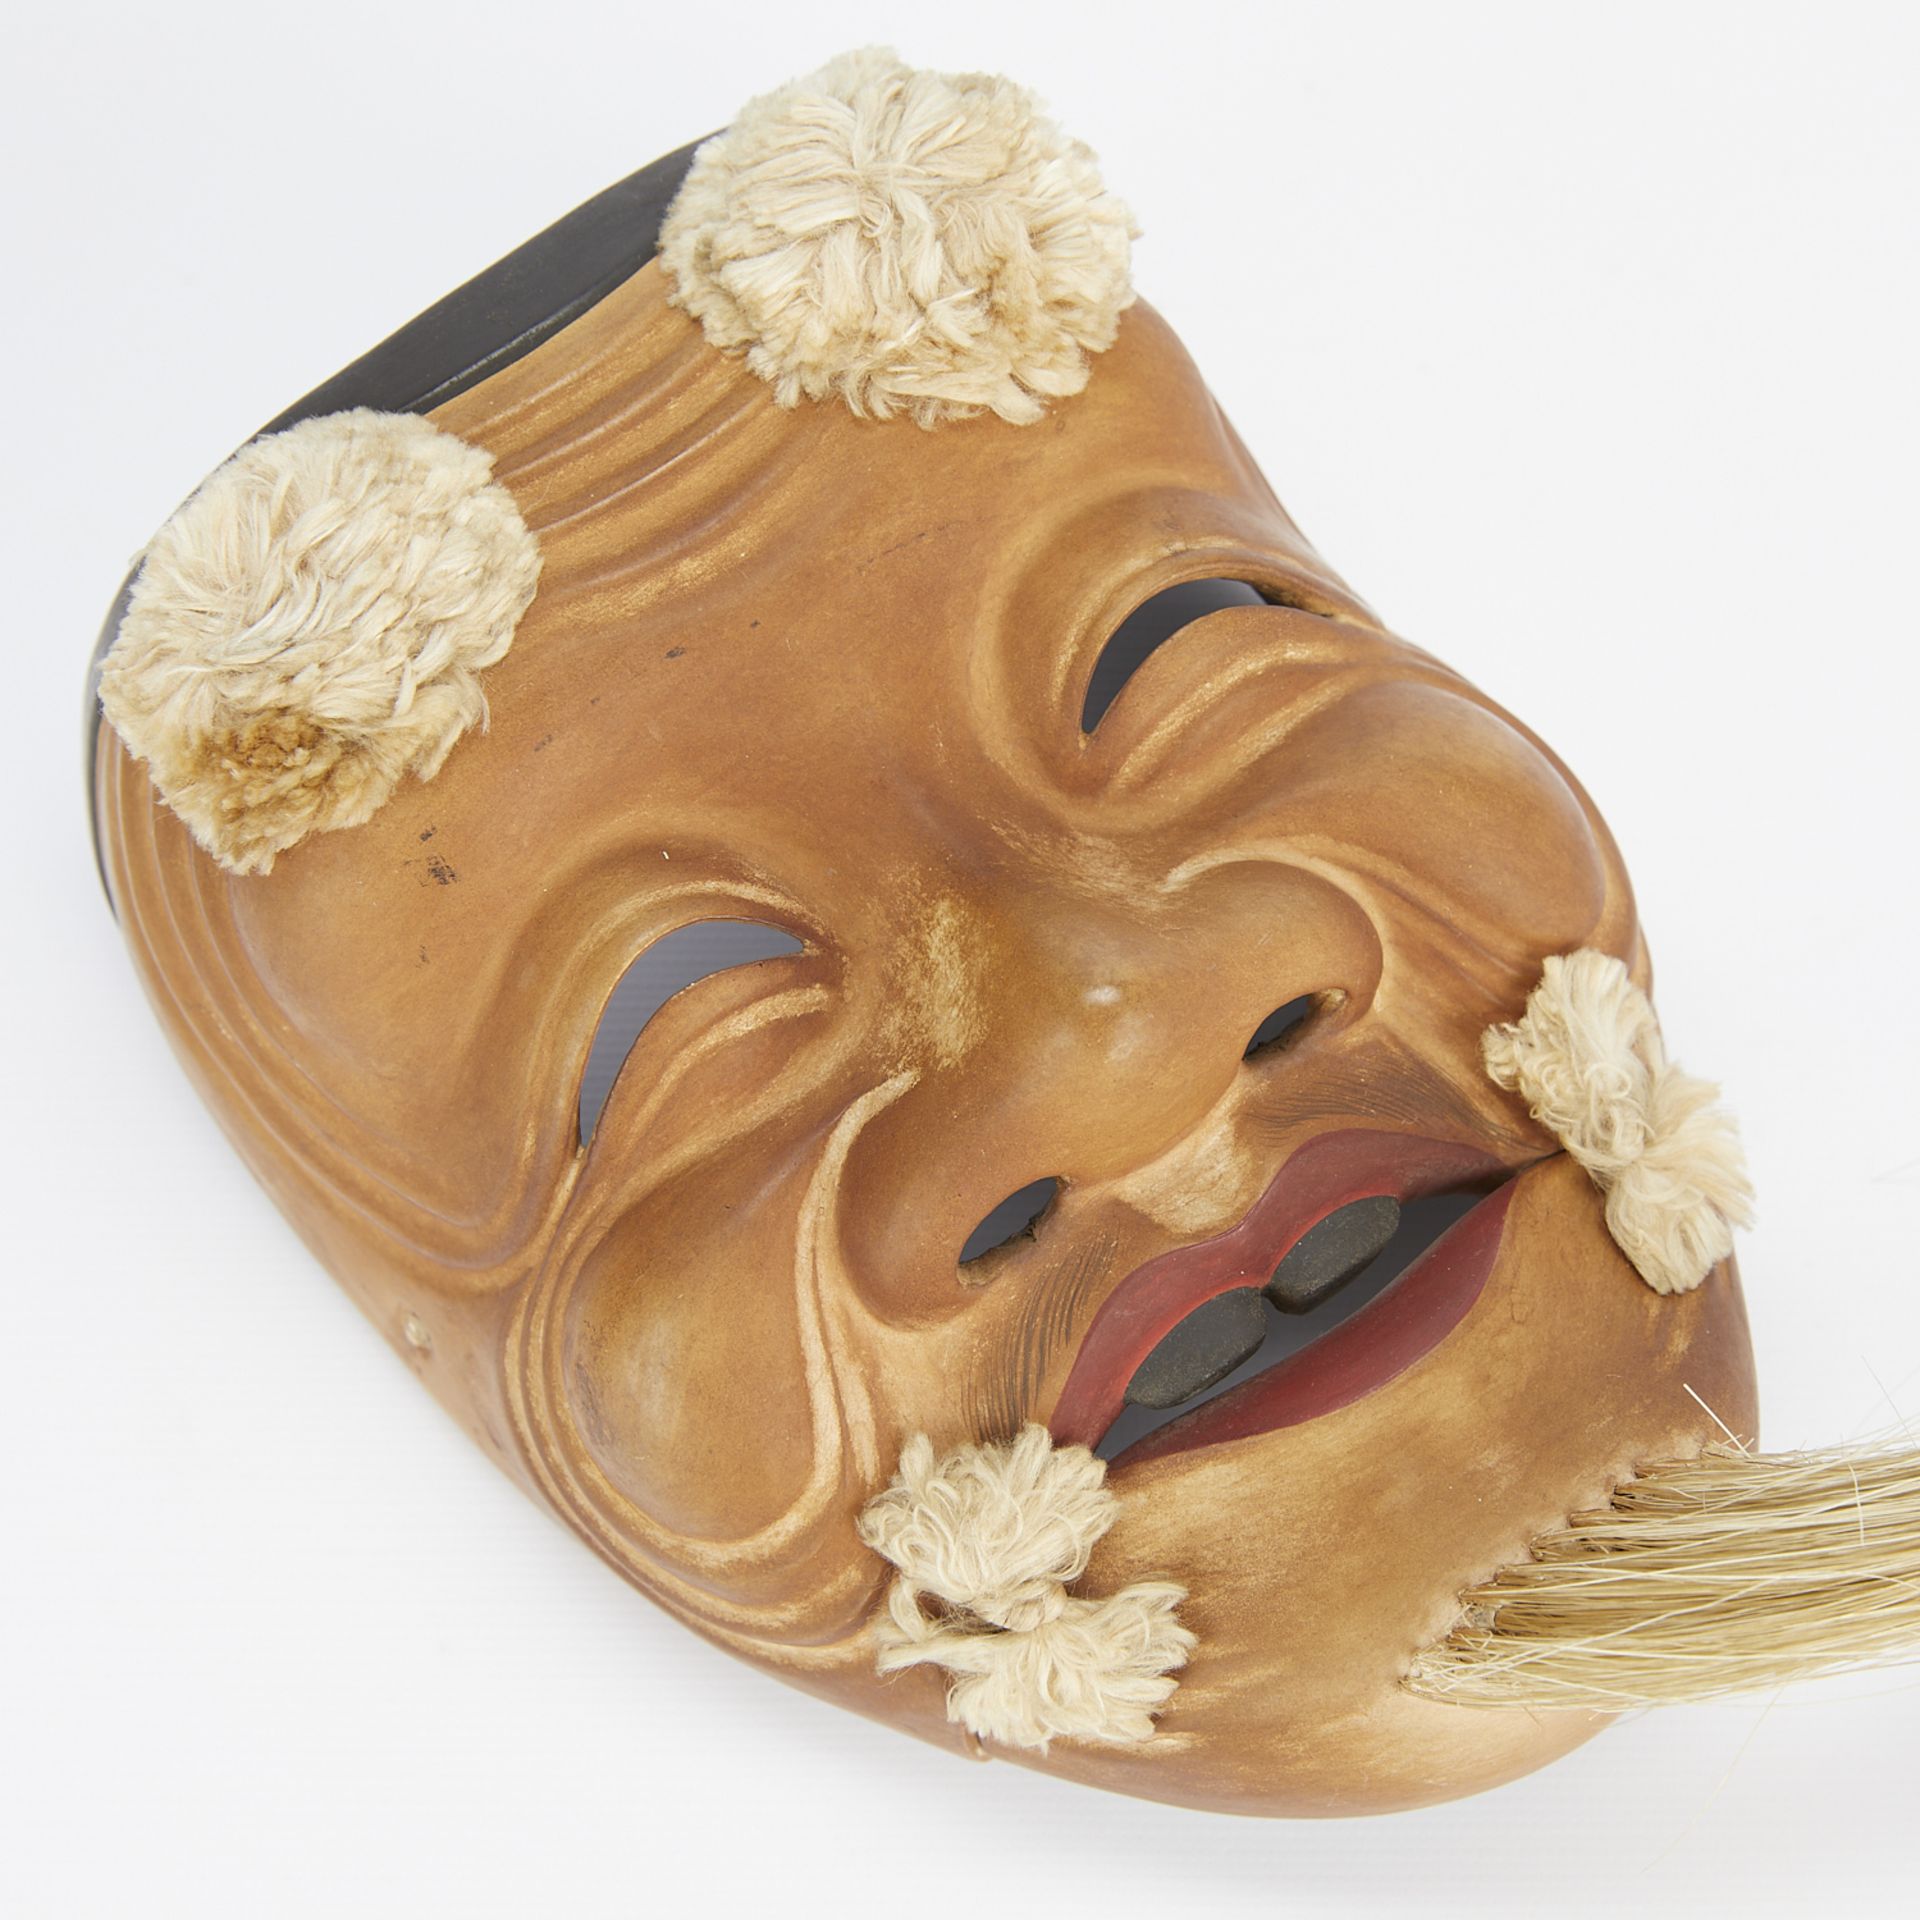 Kano Tessai Carved Wood Noh Mask - Image 8 of 15